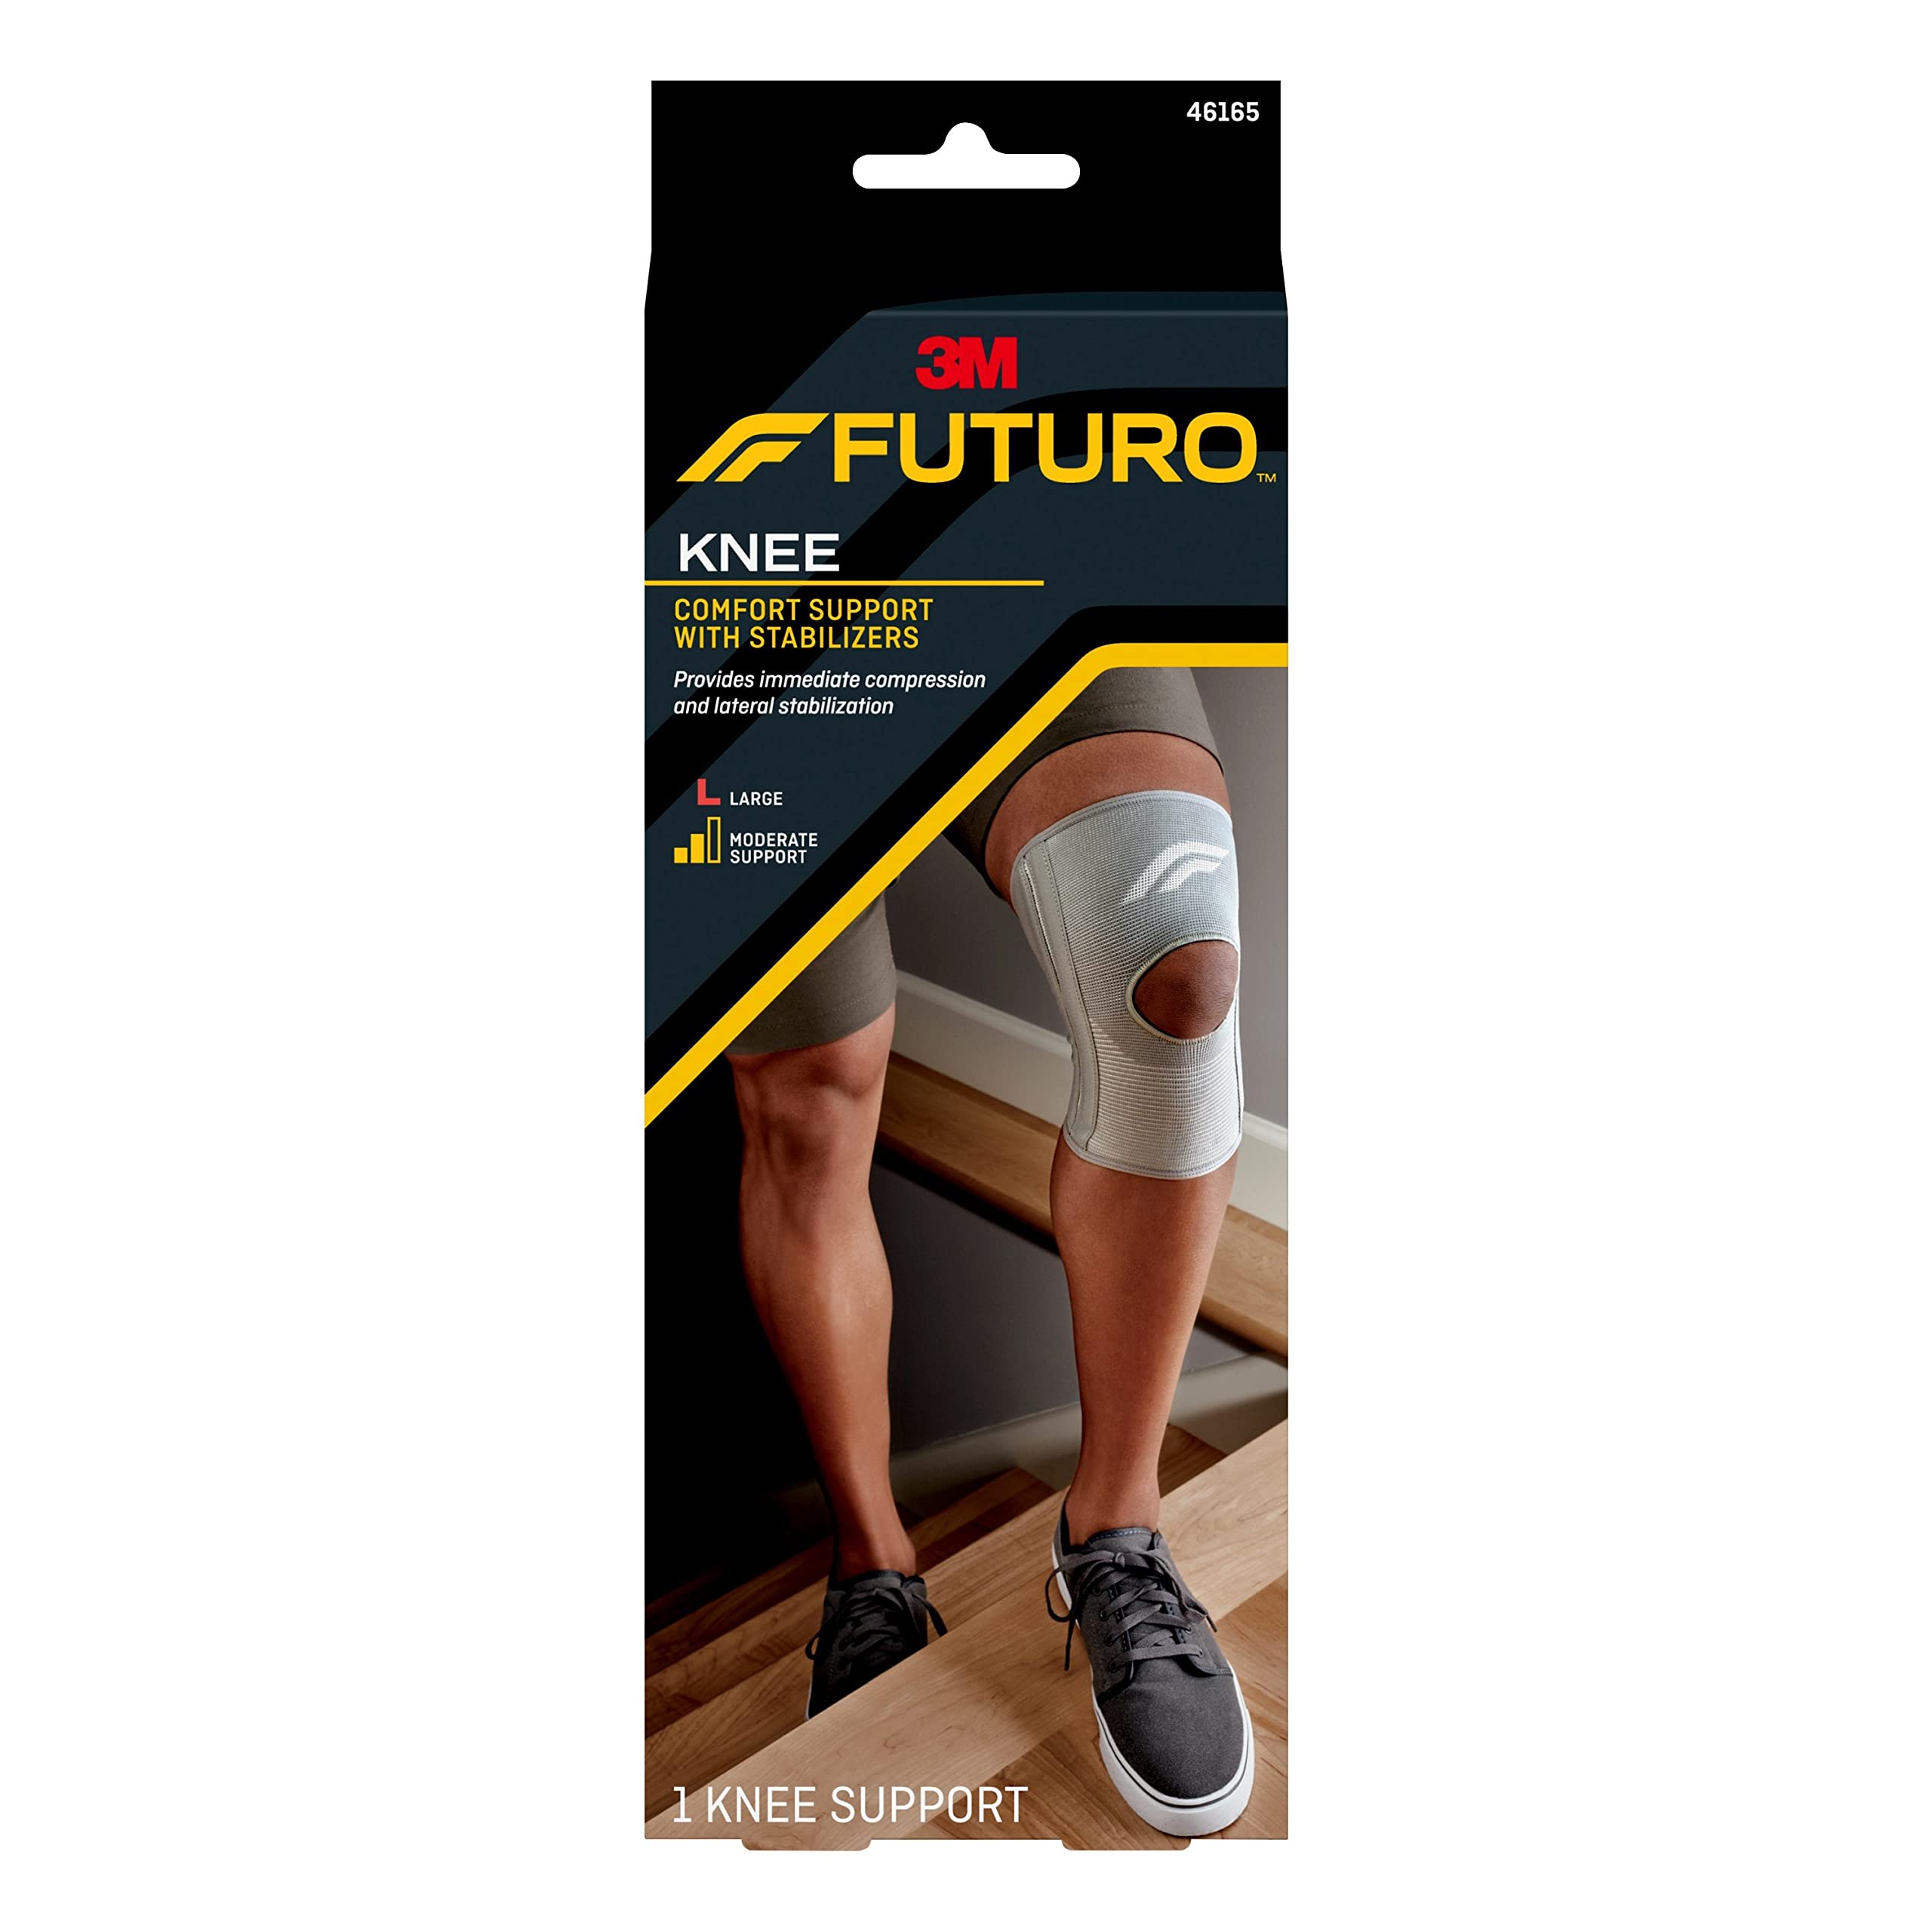 FUTURO Comfort Knee with Stabilizers, Large